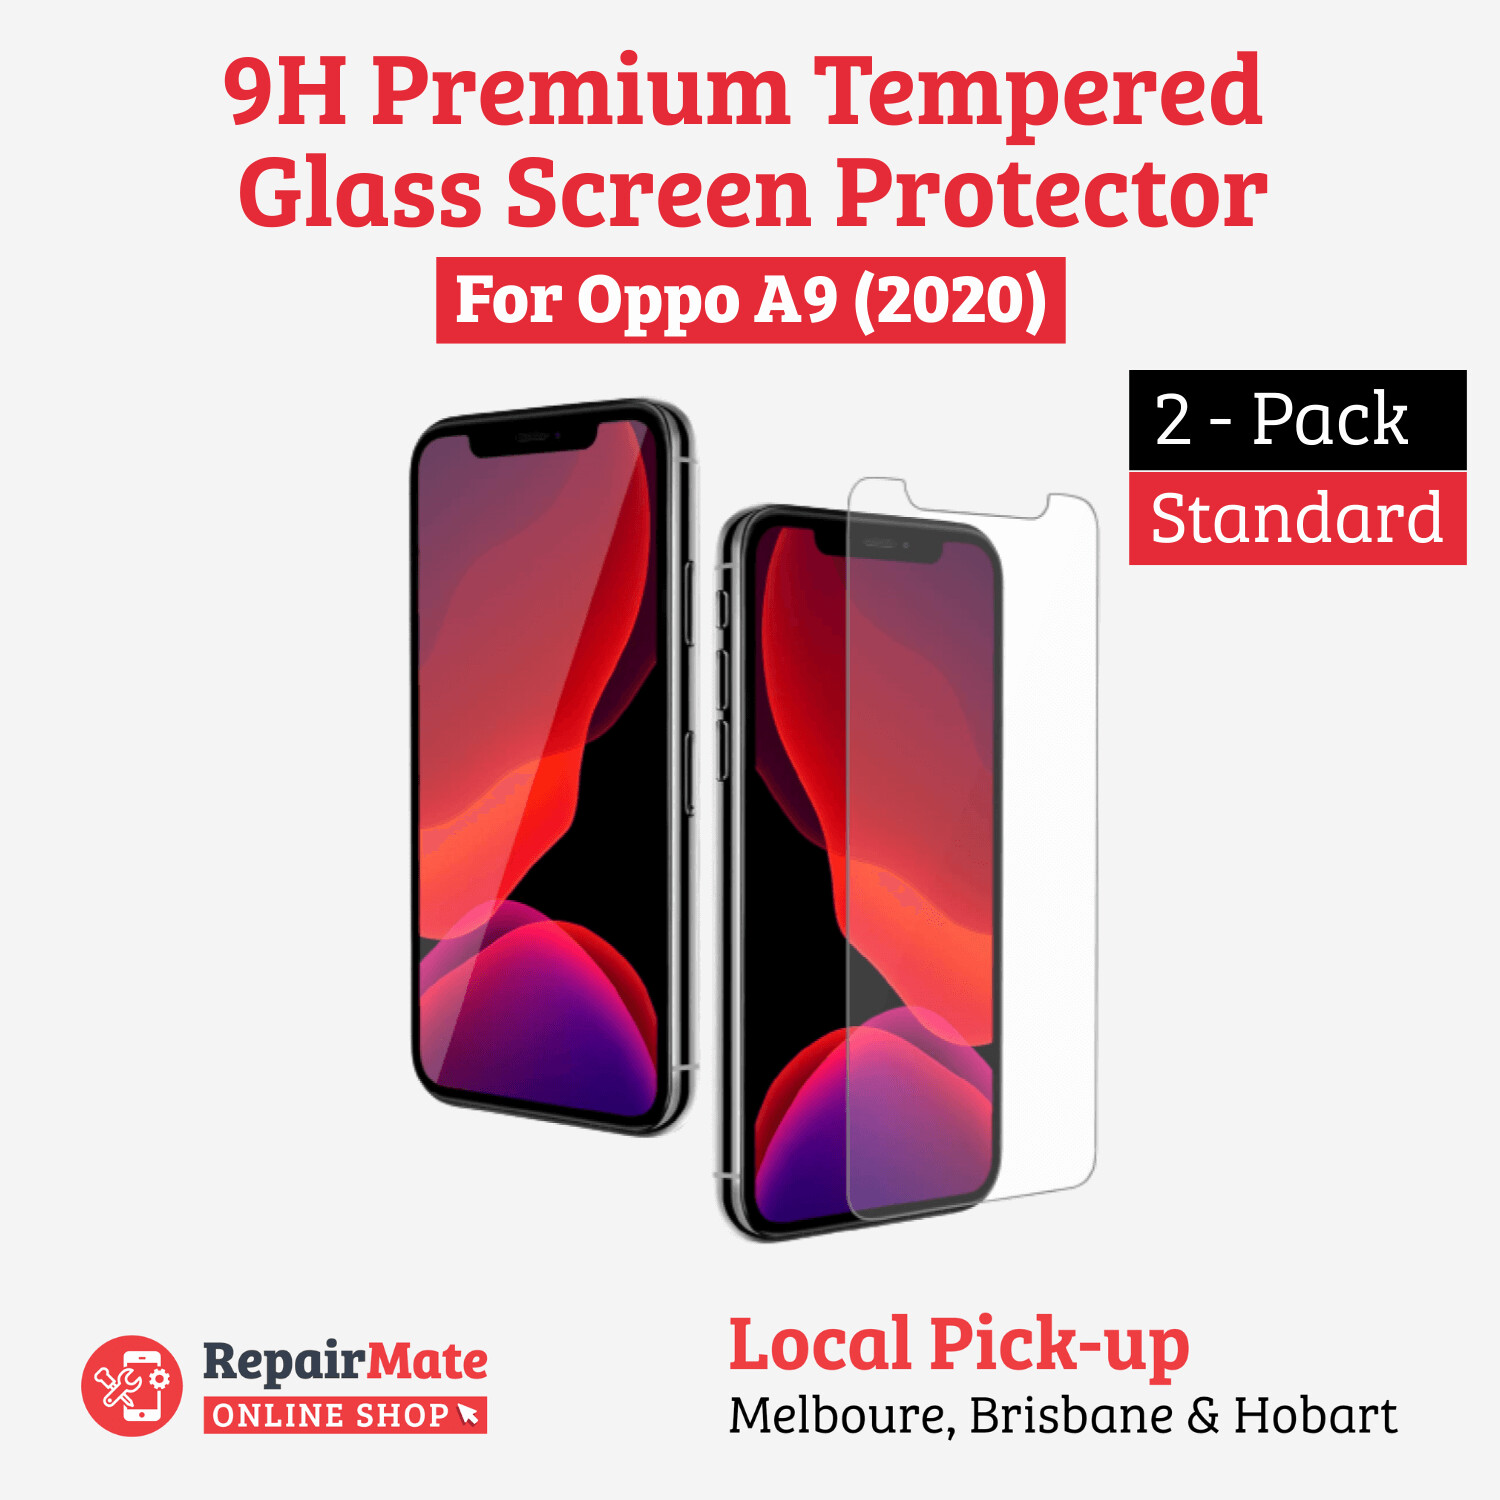 Oppo A9 (2020) 9H Premium Tempered Glass Screen Protector [2 Pack]